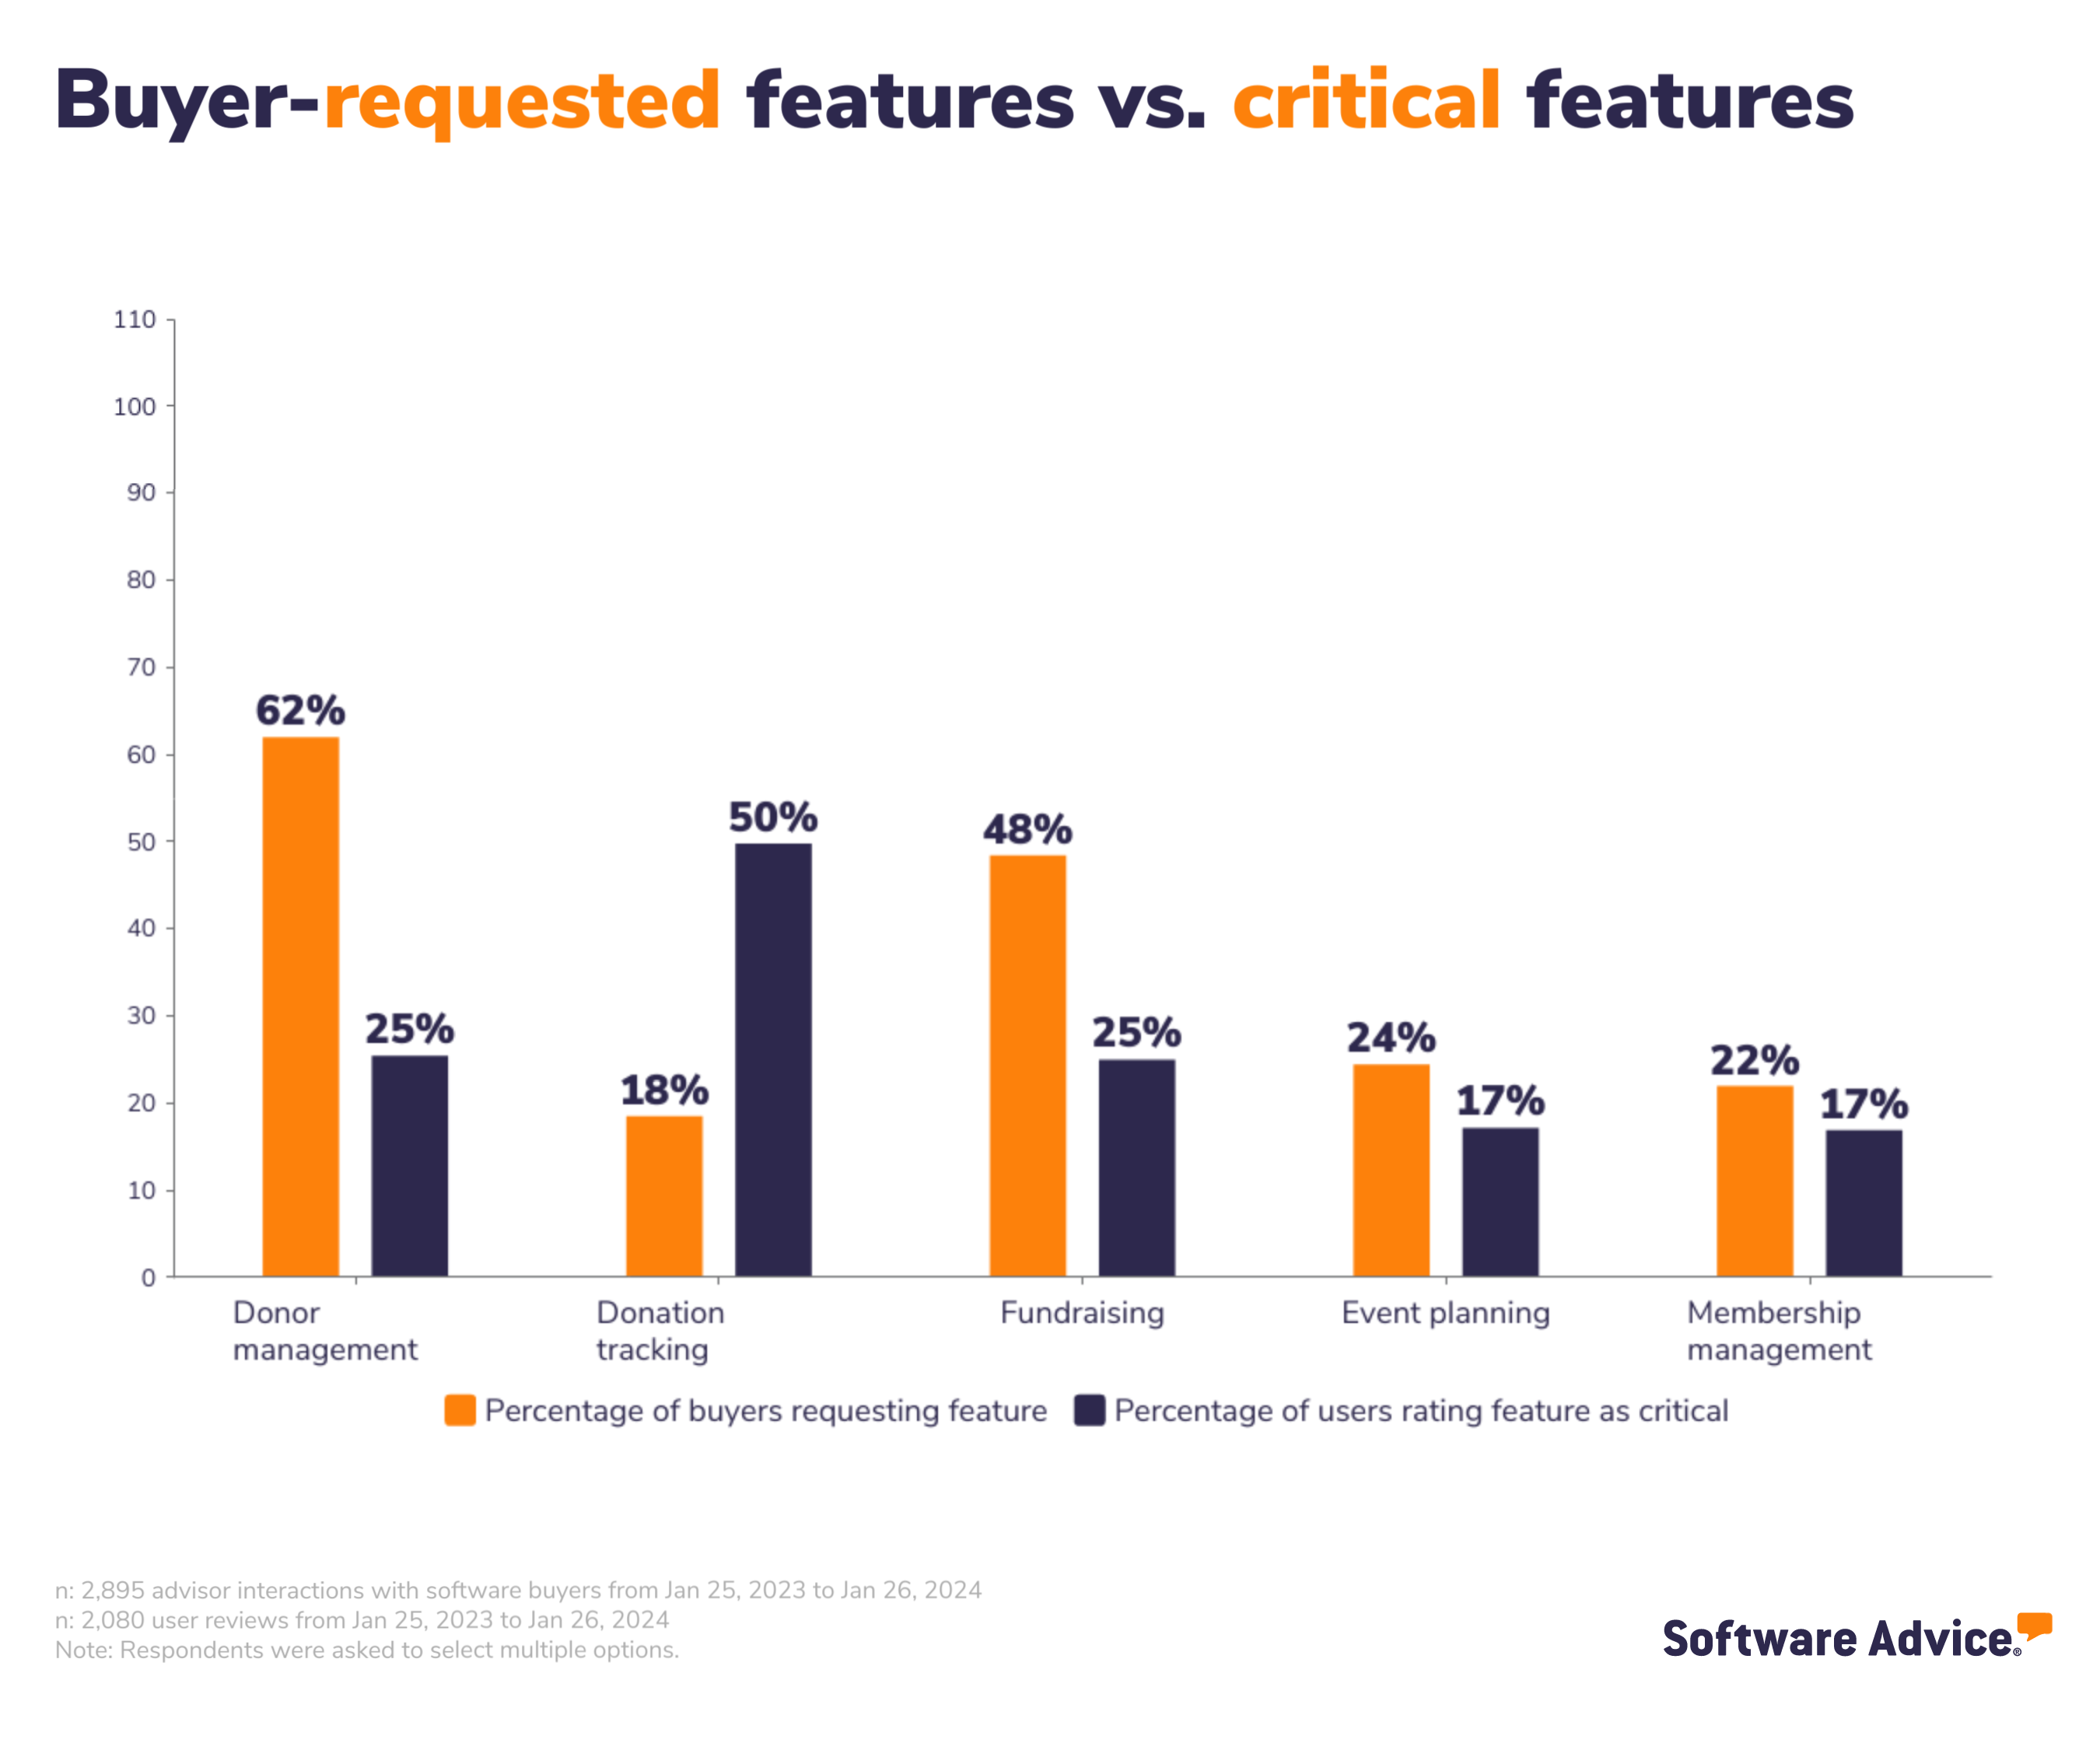 Software Advice graphic: Buyer-requested features versus critical features